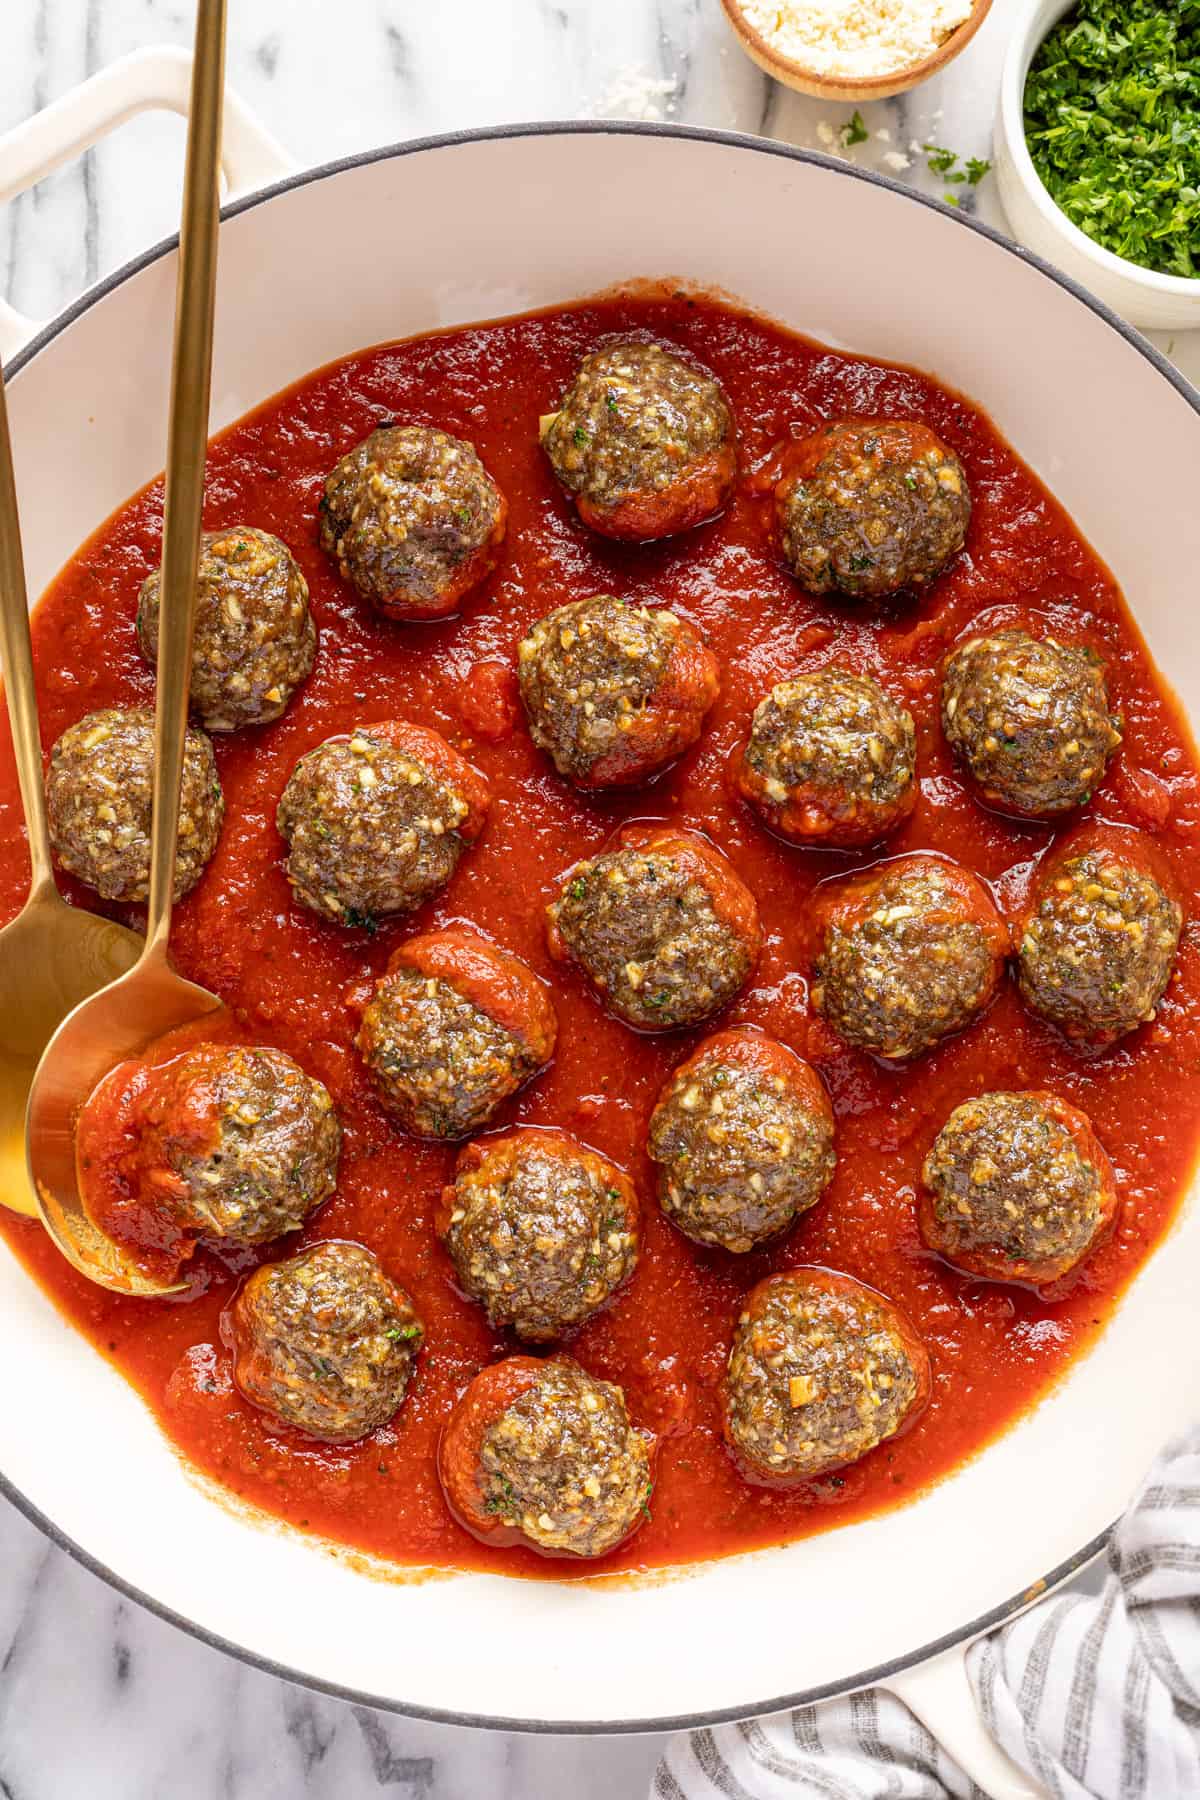 Large white saute pan filled with air fryer meatballs and marinara sauce.